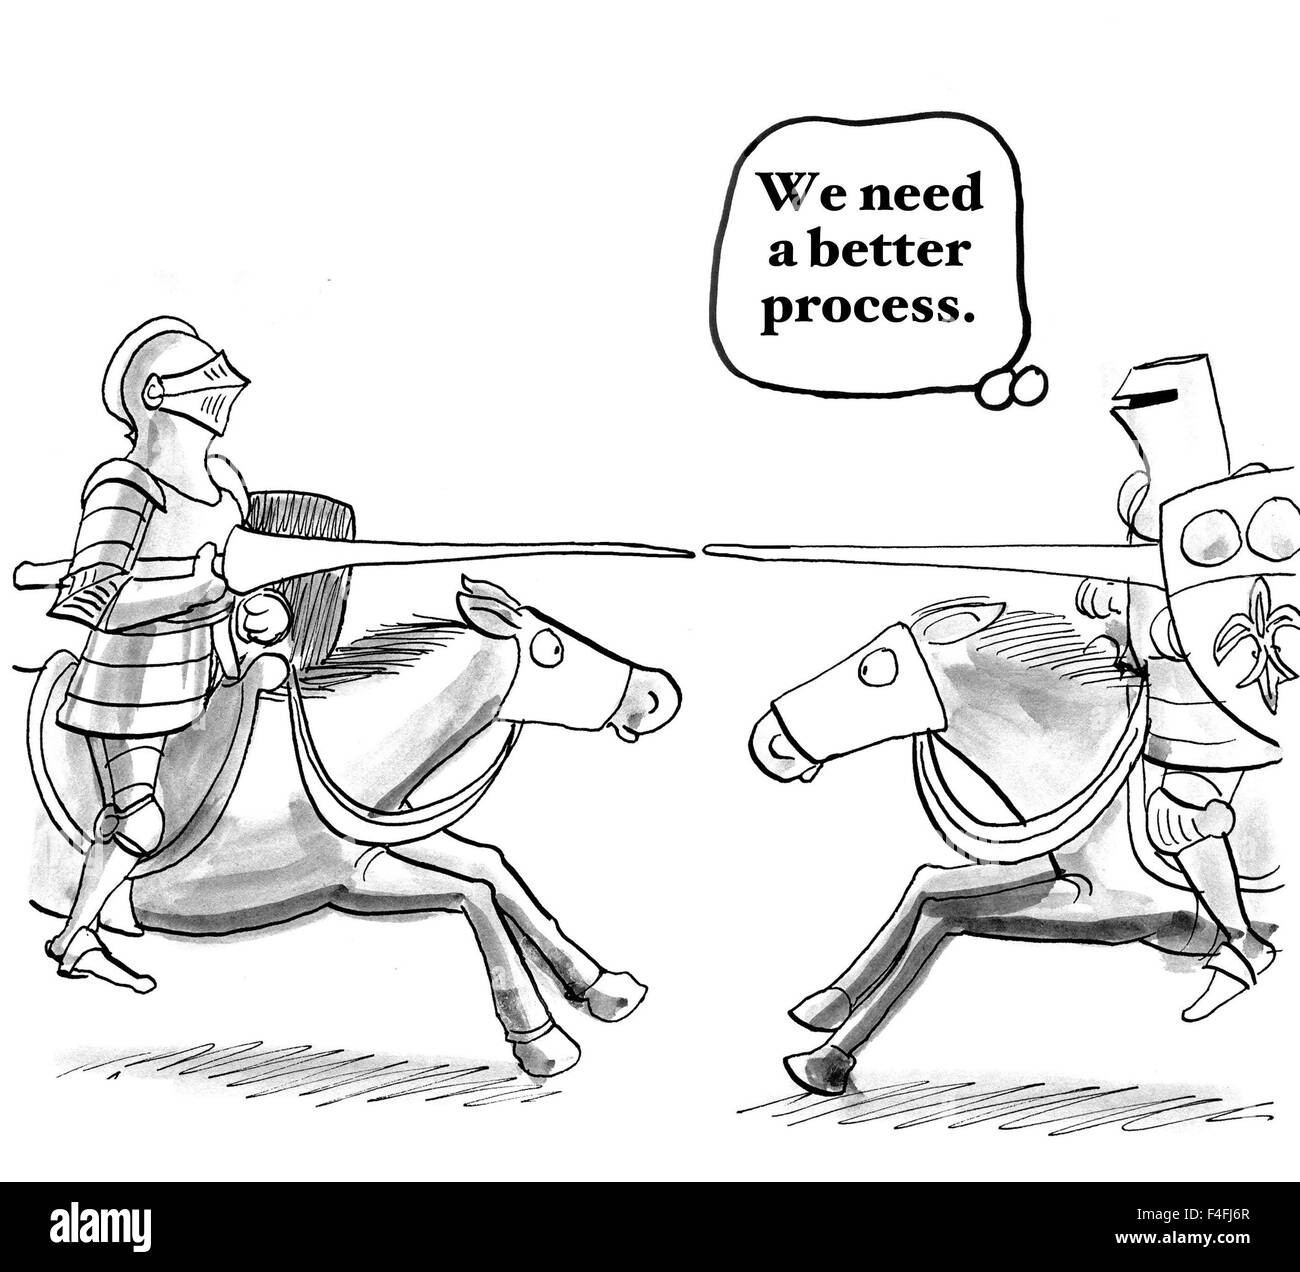 Professional cartoon of two knights jousting on horseback, 'We need a better process'. Stock Photo